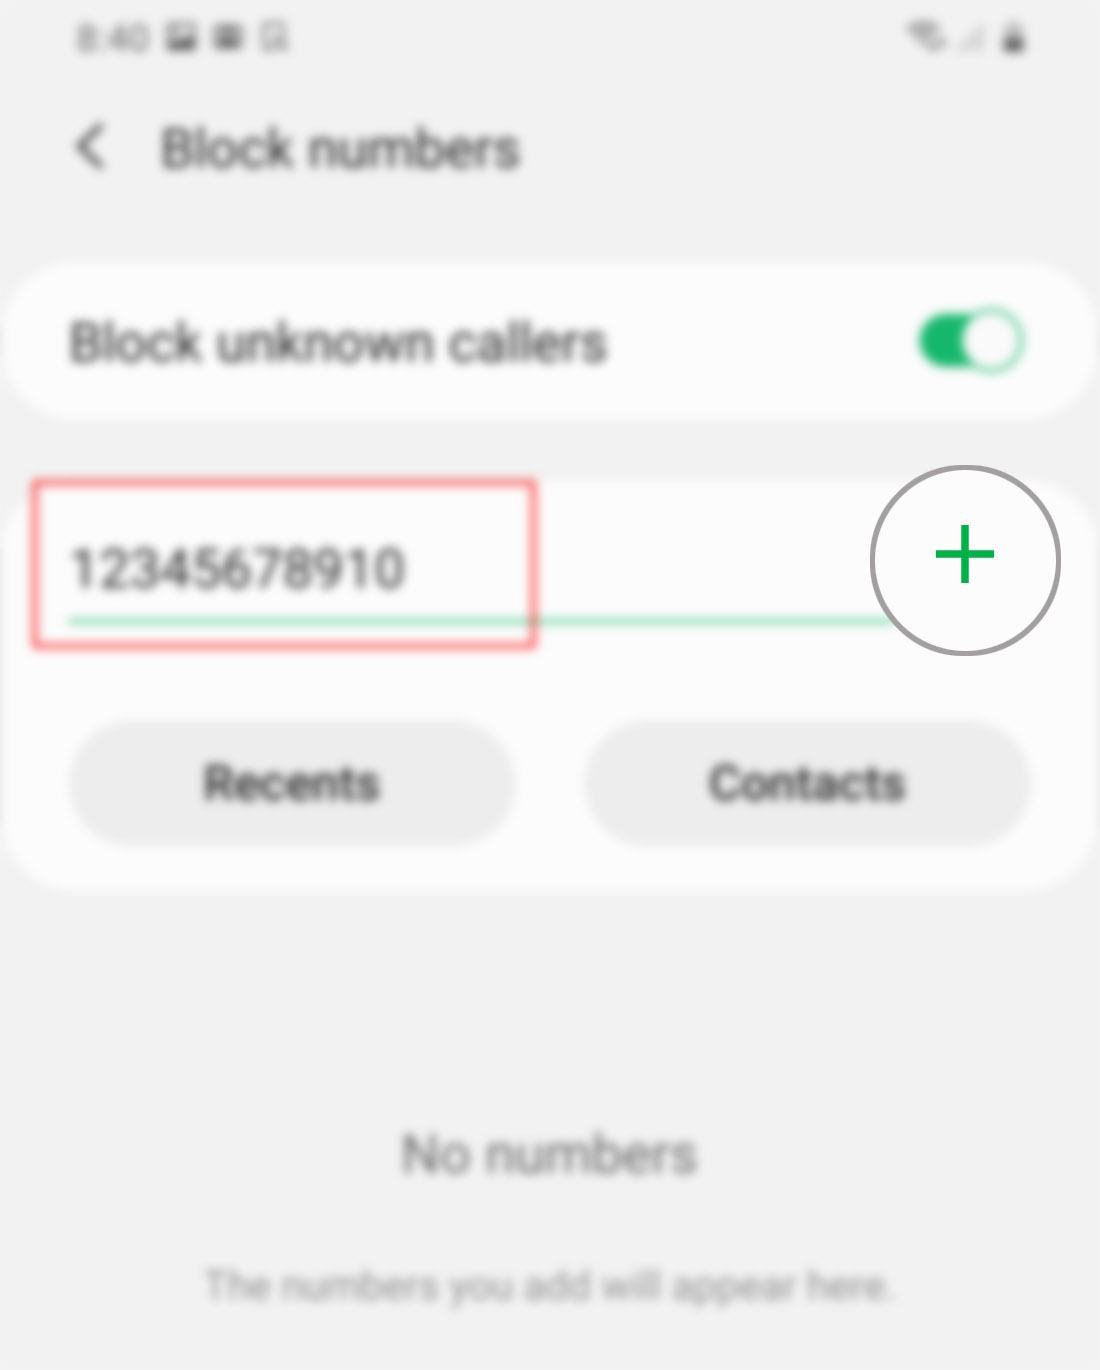 block-unblock phone number on galaxy s20- add phone number to block